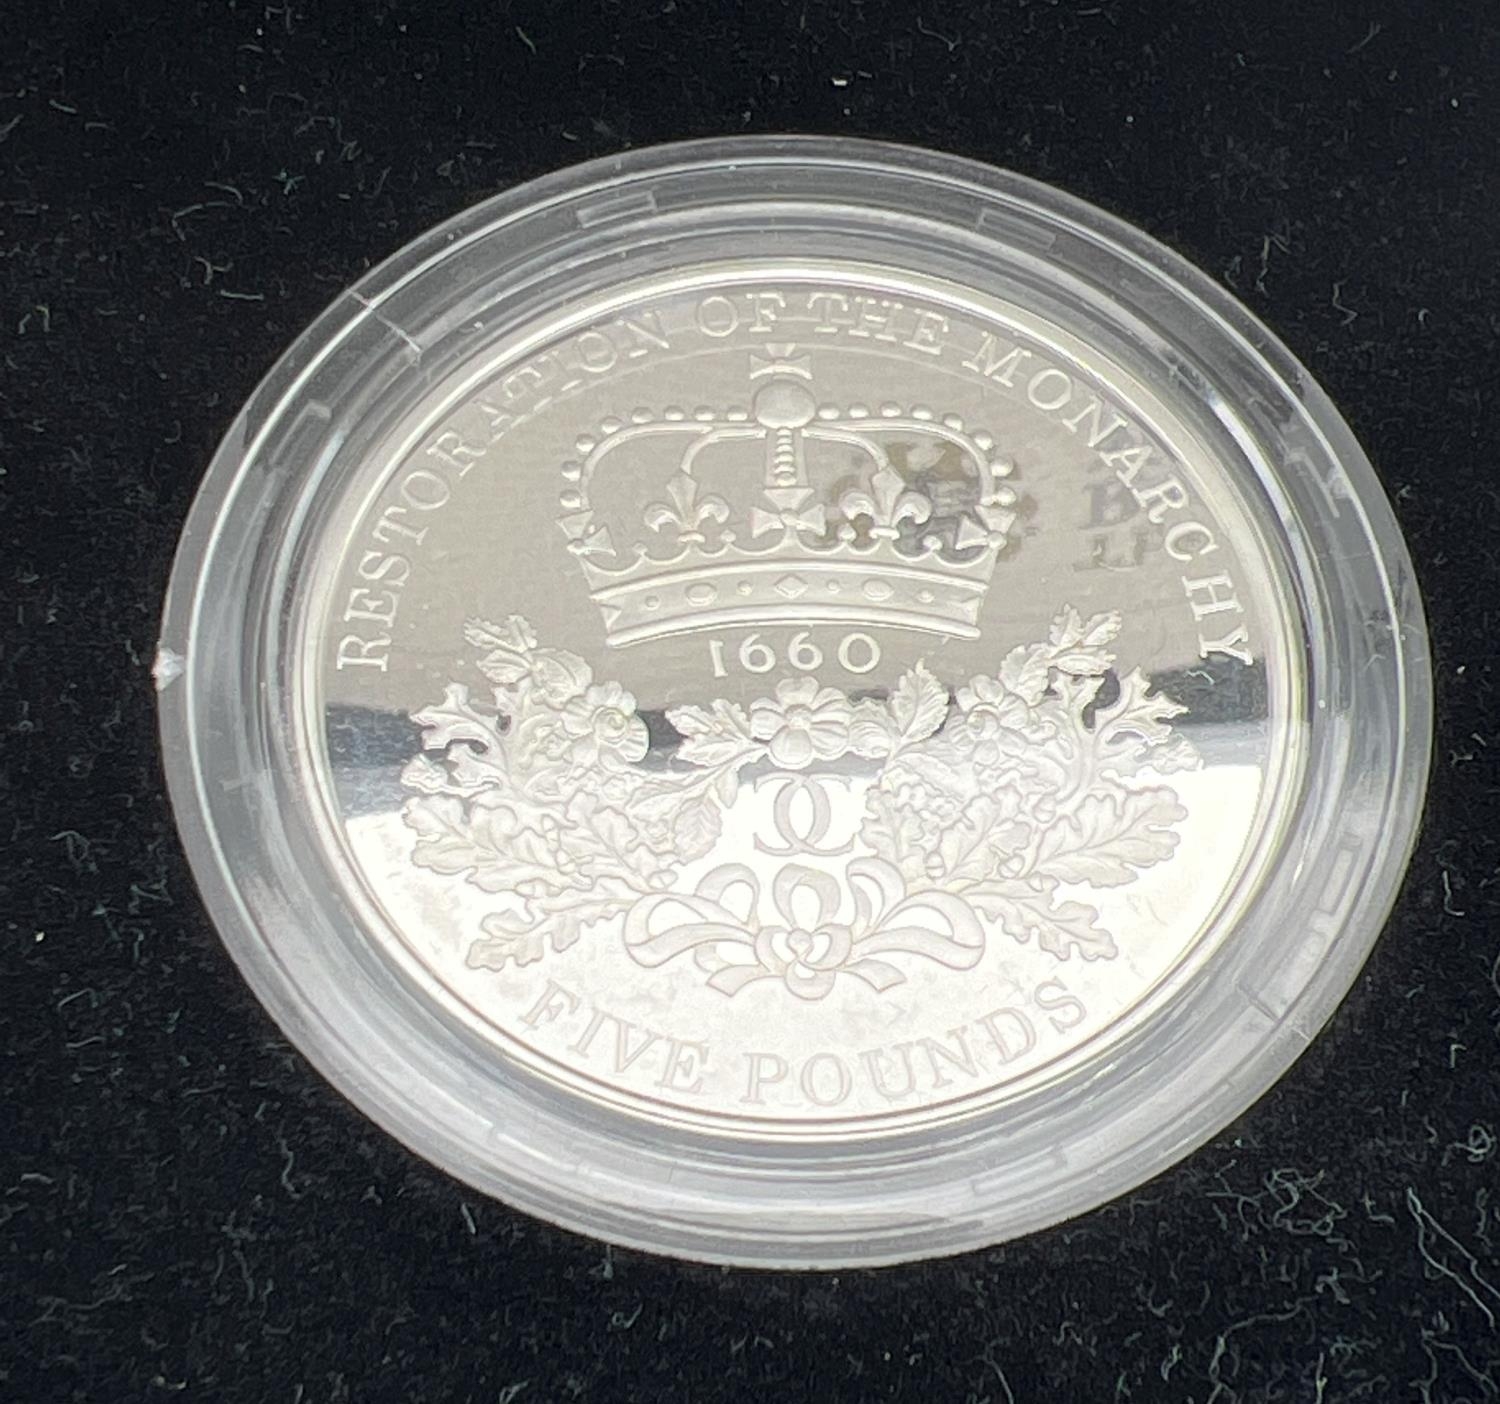 A boxed limited edition 2010 Restoration of the Monarchy Â£5 silver proof coin by The Royal Mint. - Image 2 of 2